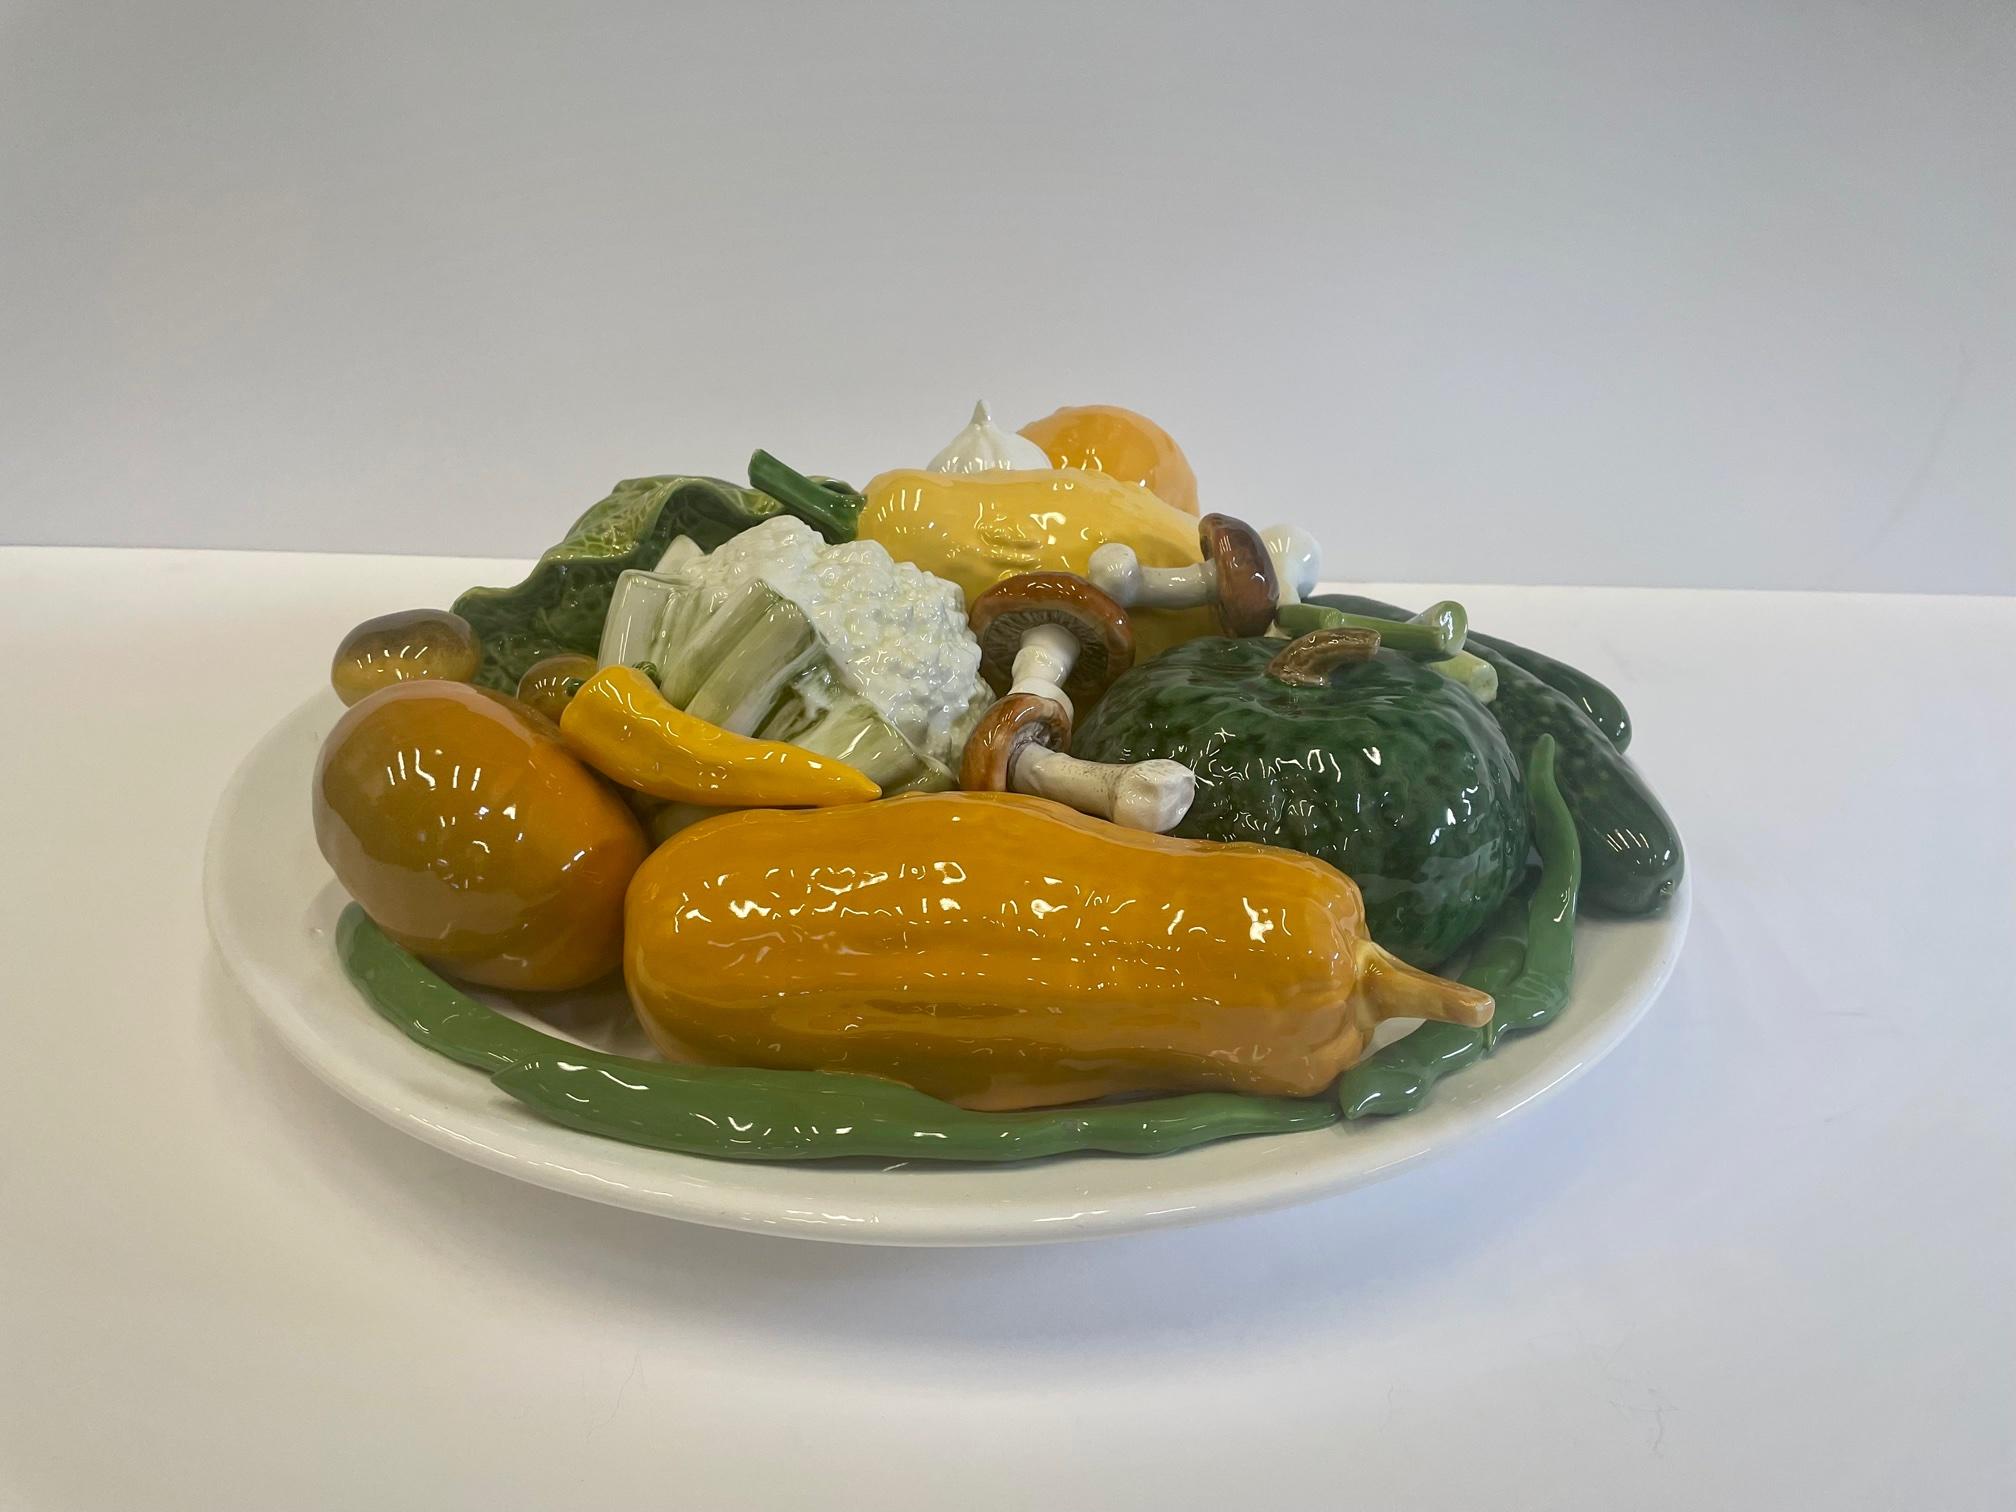 A work of art Italian glazed ceramic charger plate in monumental scale with mouthwatering display of better than life like vegetables.